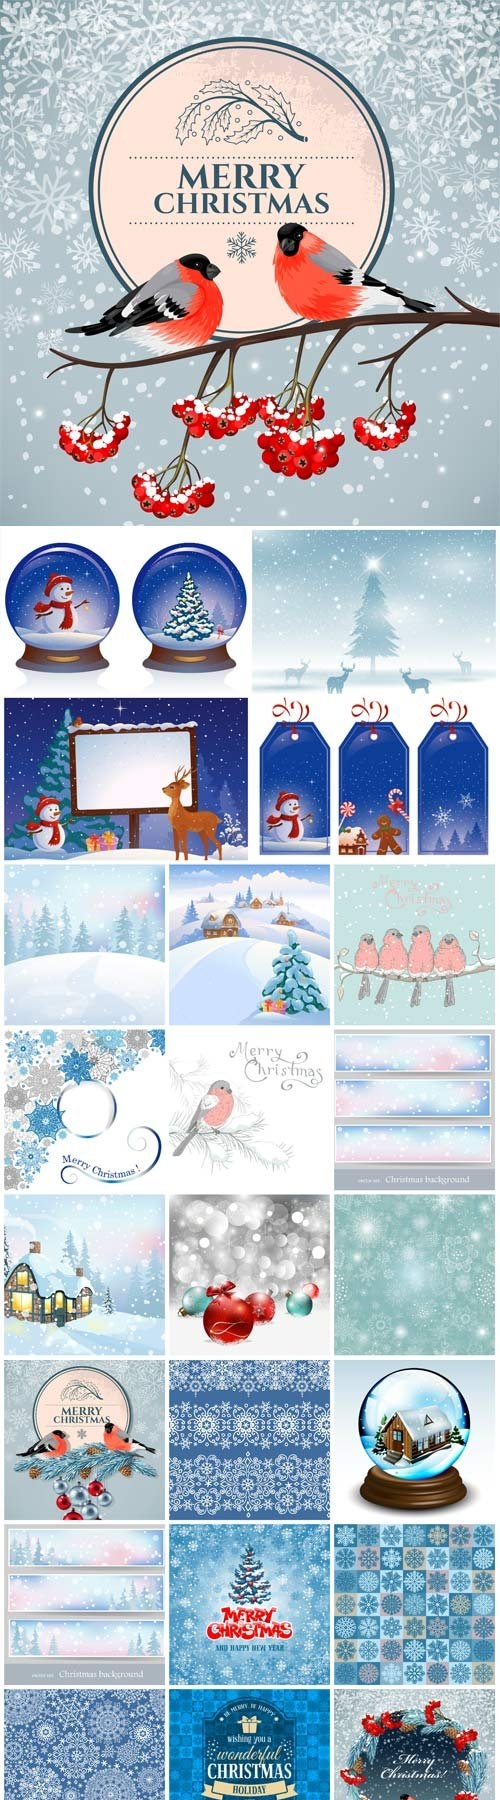 New Year and Christmas illustrations in vector - 10